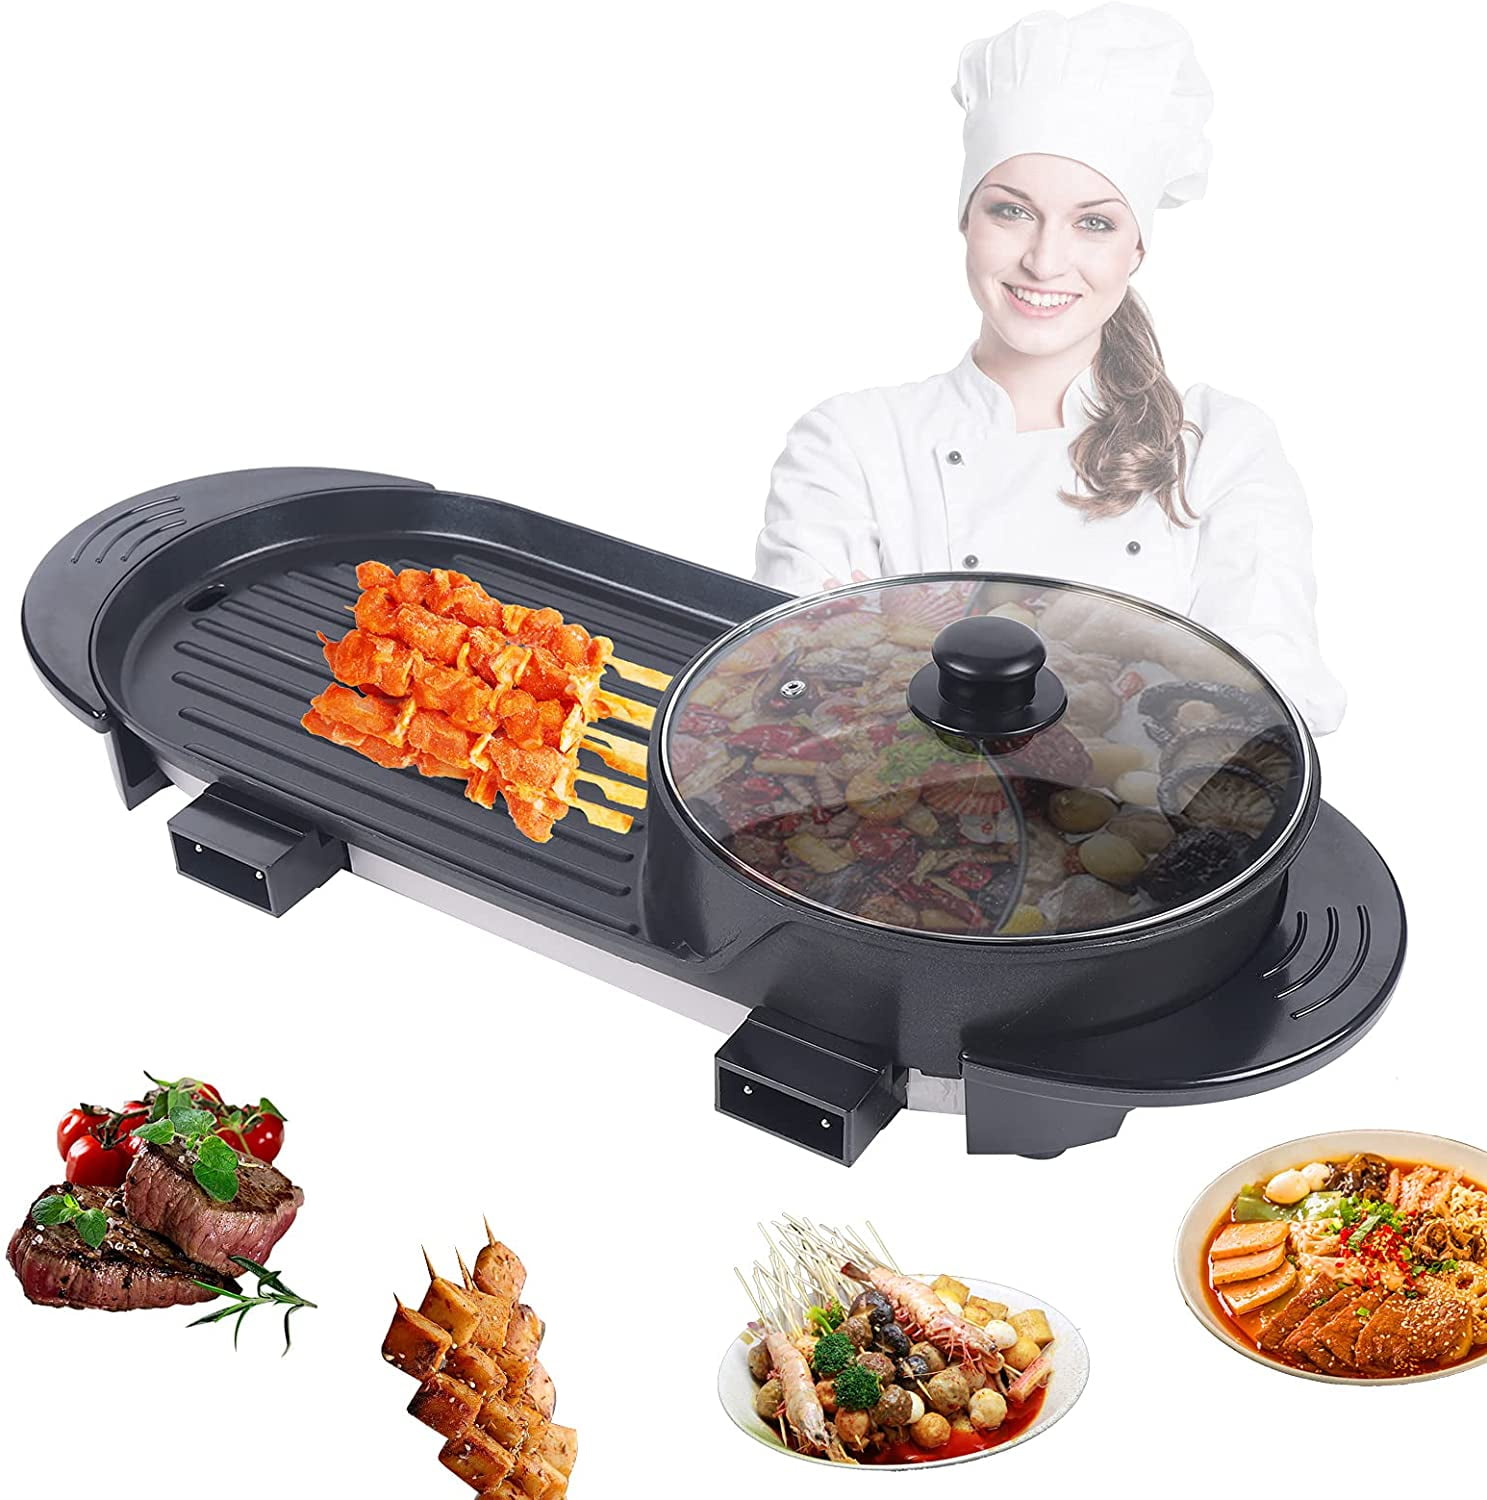 Portable Electric Grill 2 in 1 Electric Smokeless Barbecue Grill & Double Pot Soup Maker with 5 Temperature adjustments for Indoor Outdoor 